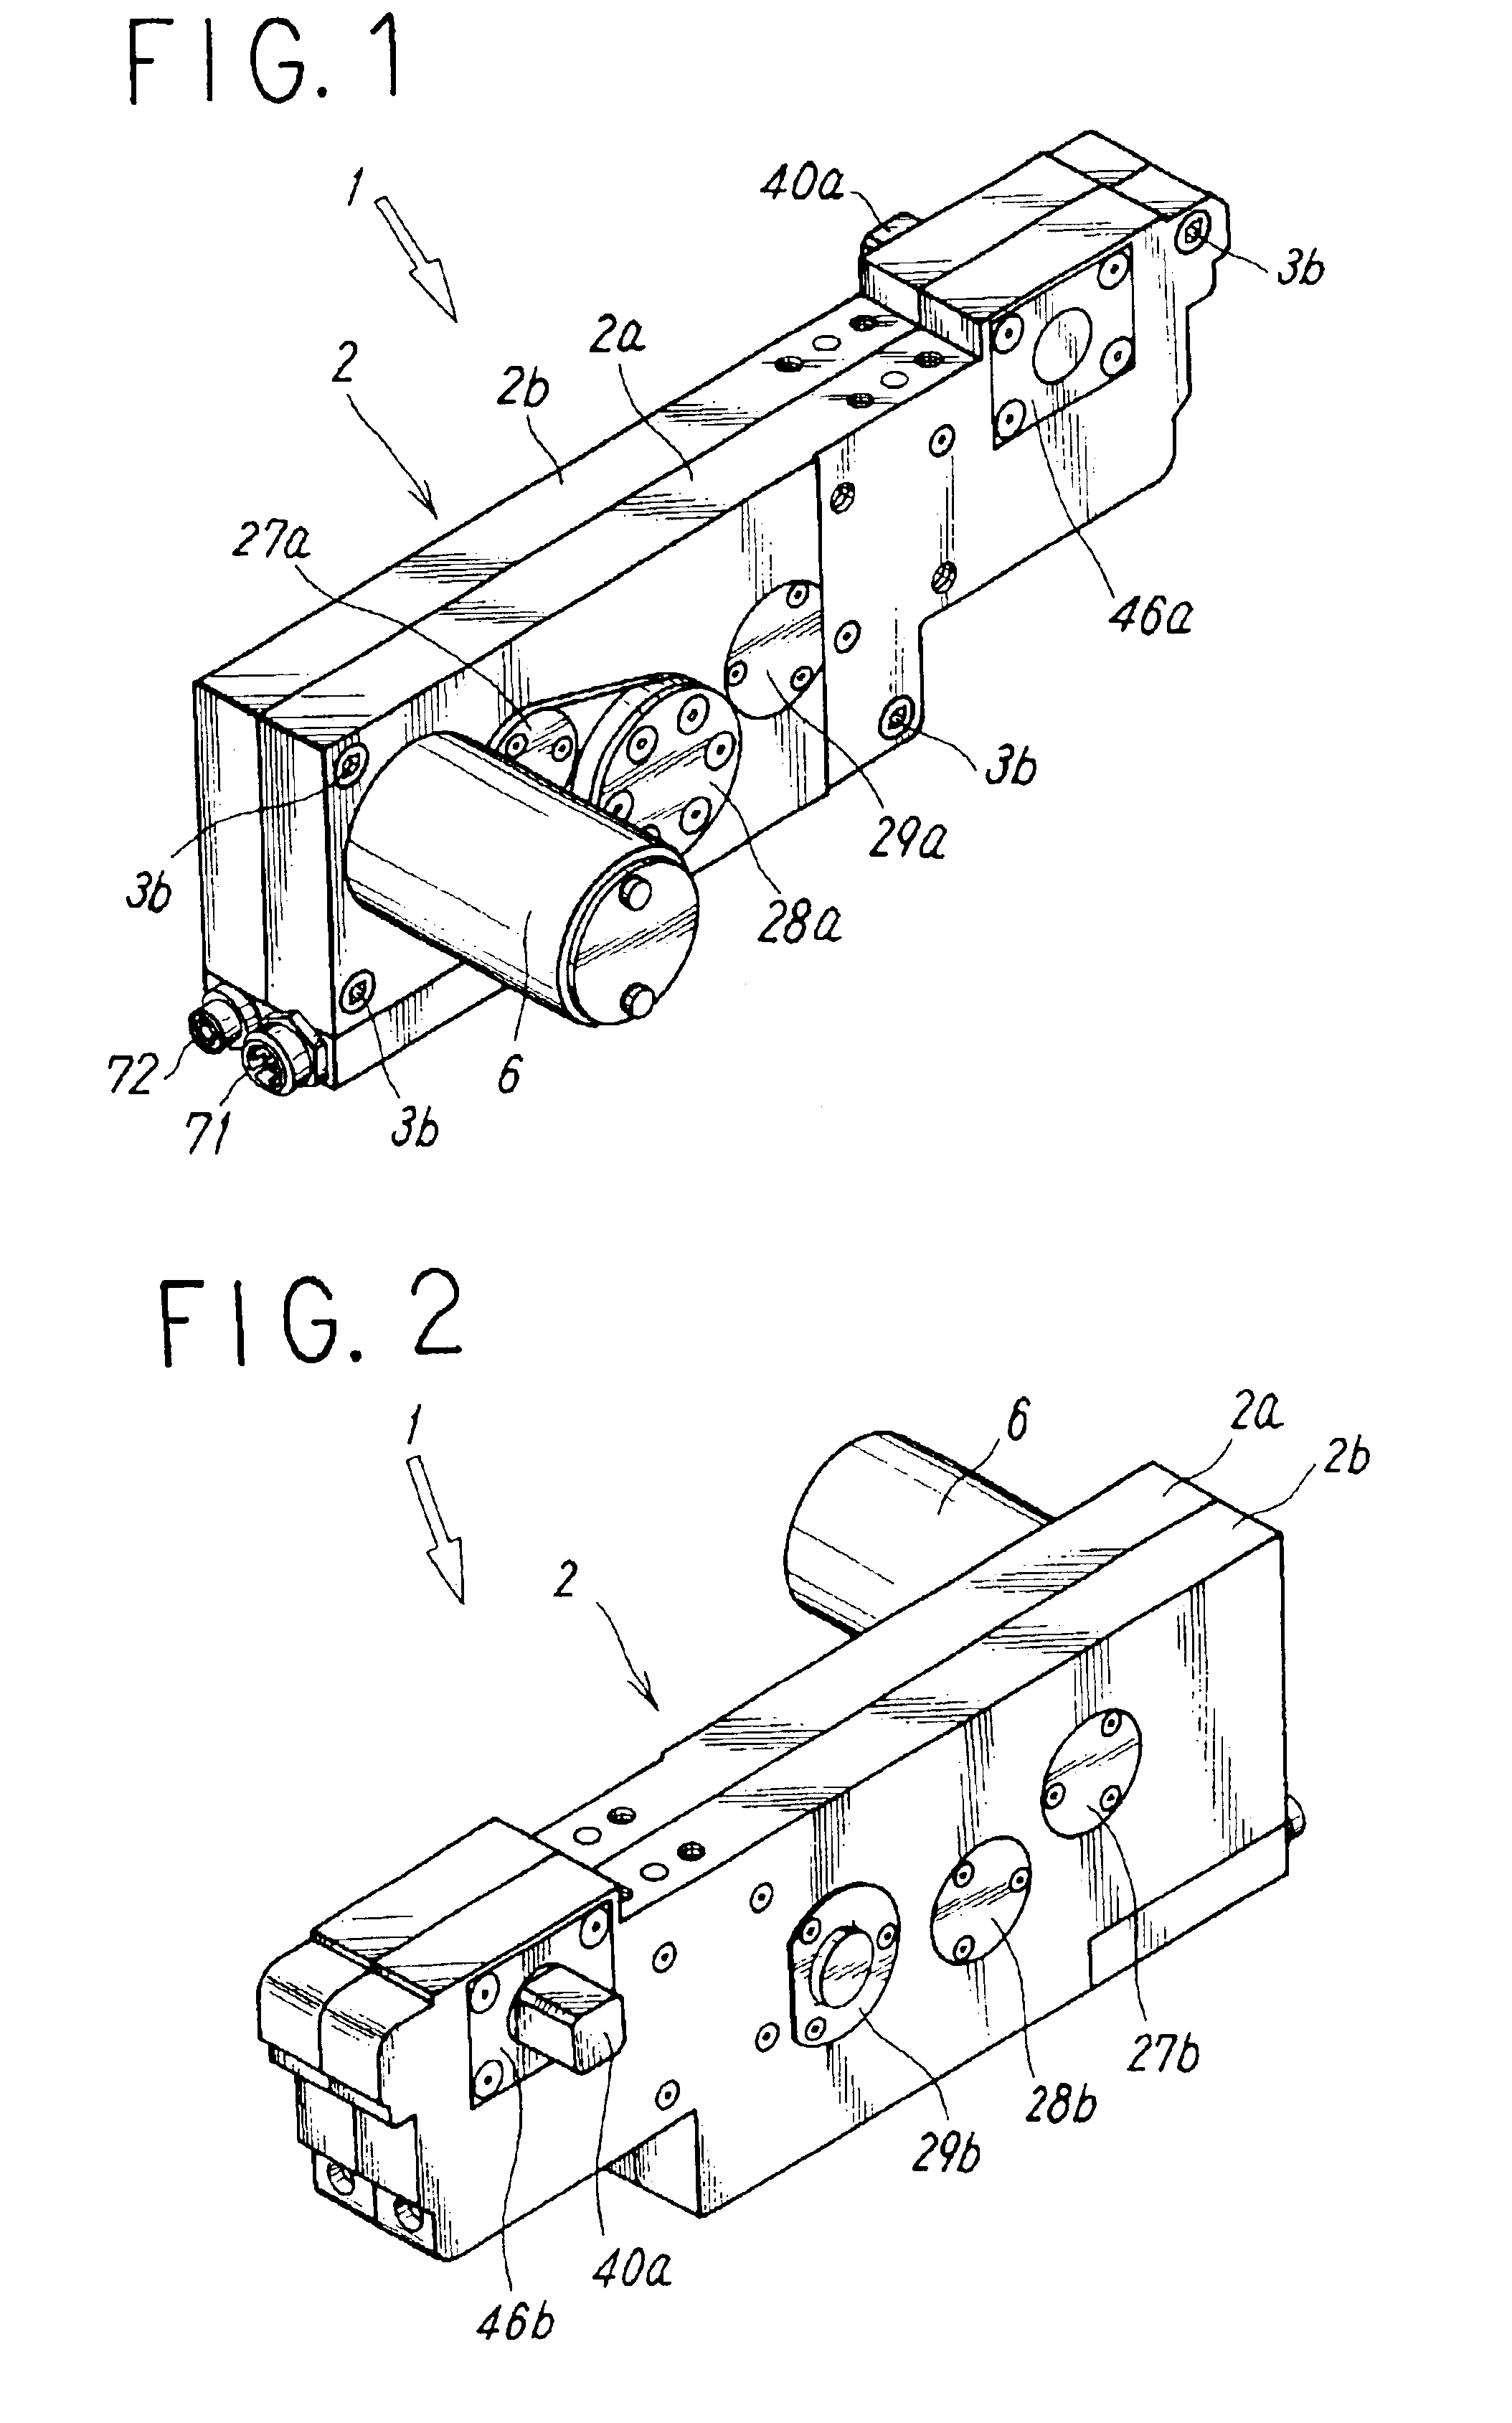 Electric clamping device